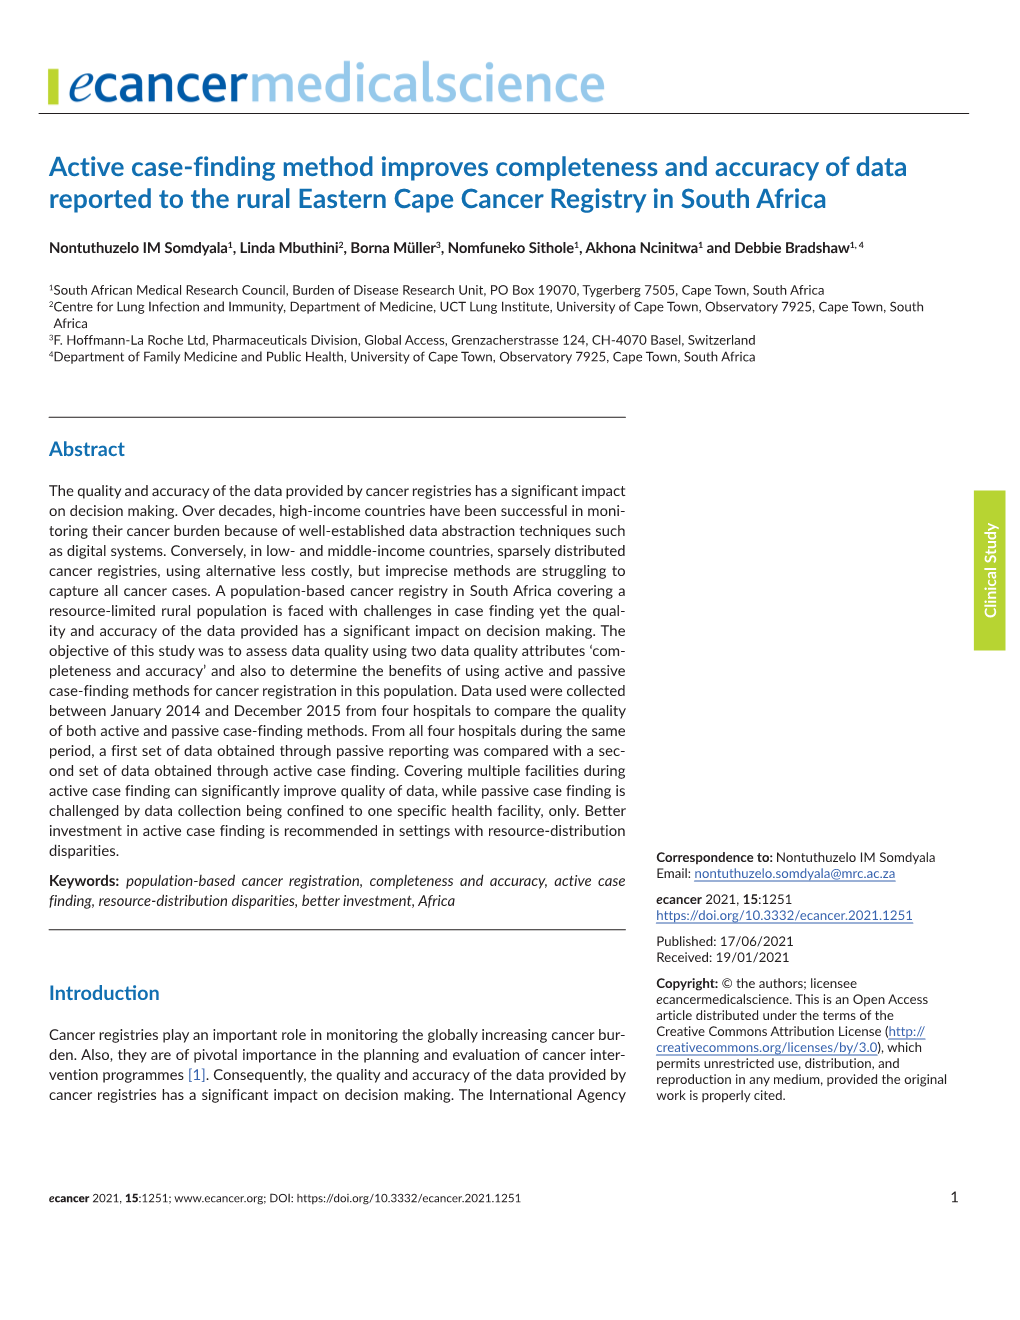 Active Case-Finding Method Improves Completeness and Accuracy of Data Reported to the Rural Eastern Cape Cancer Registry in South Africa